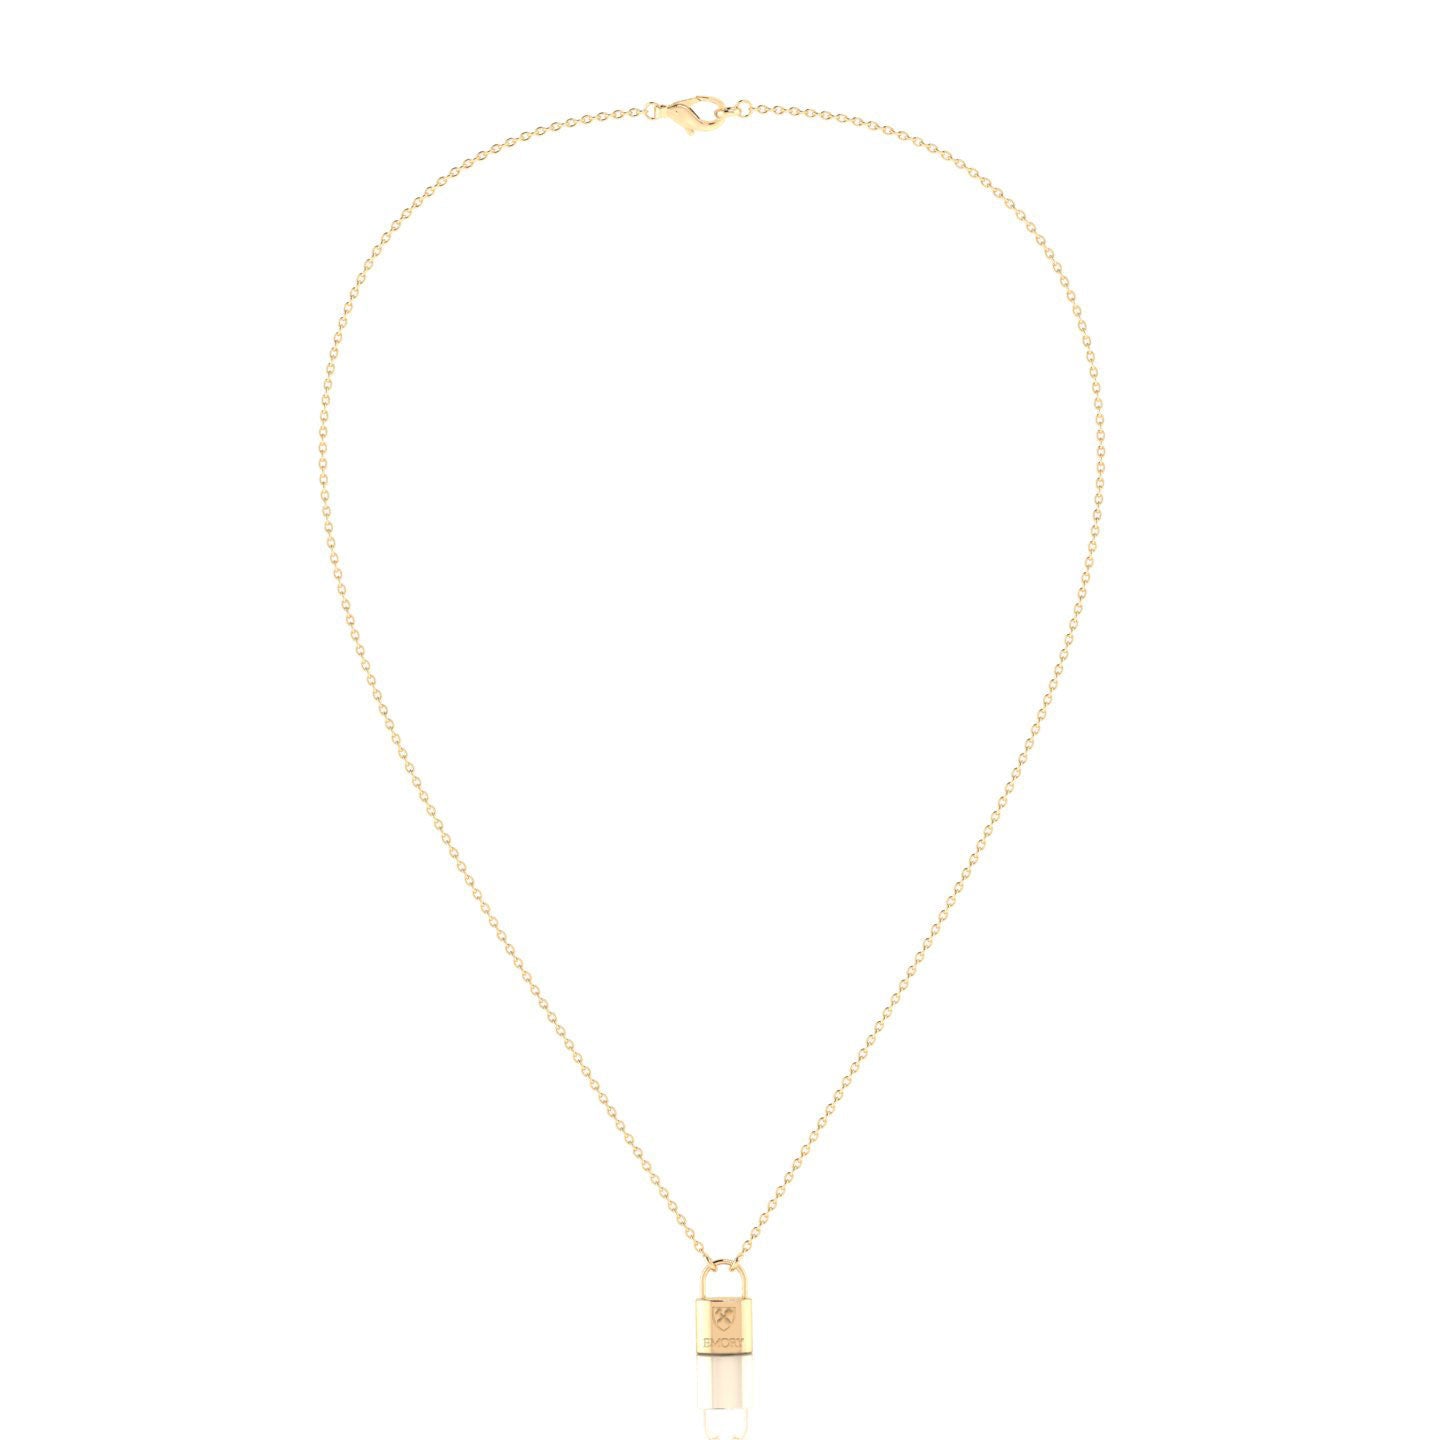 The Emory Padlock Pendant in 14kt yellow gold - a symbol of academic excellence rendered in exquisite yellow gold.